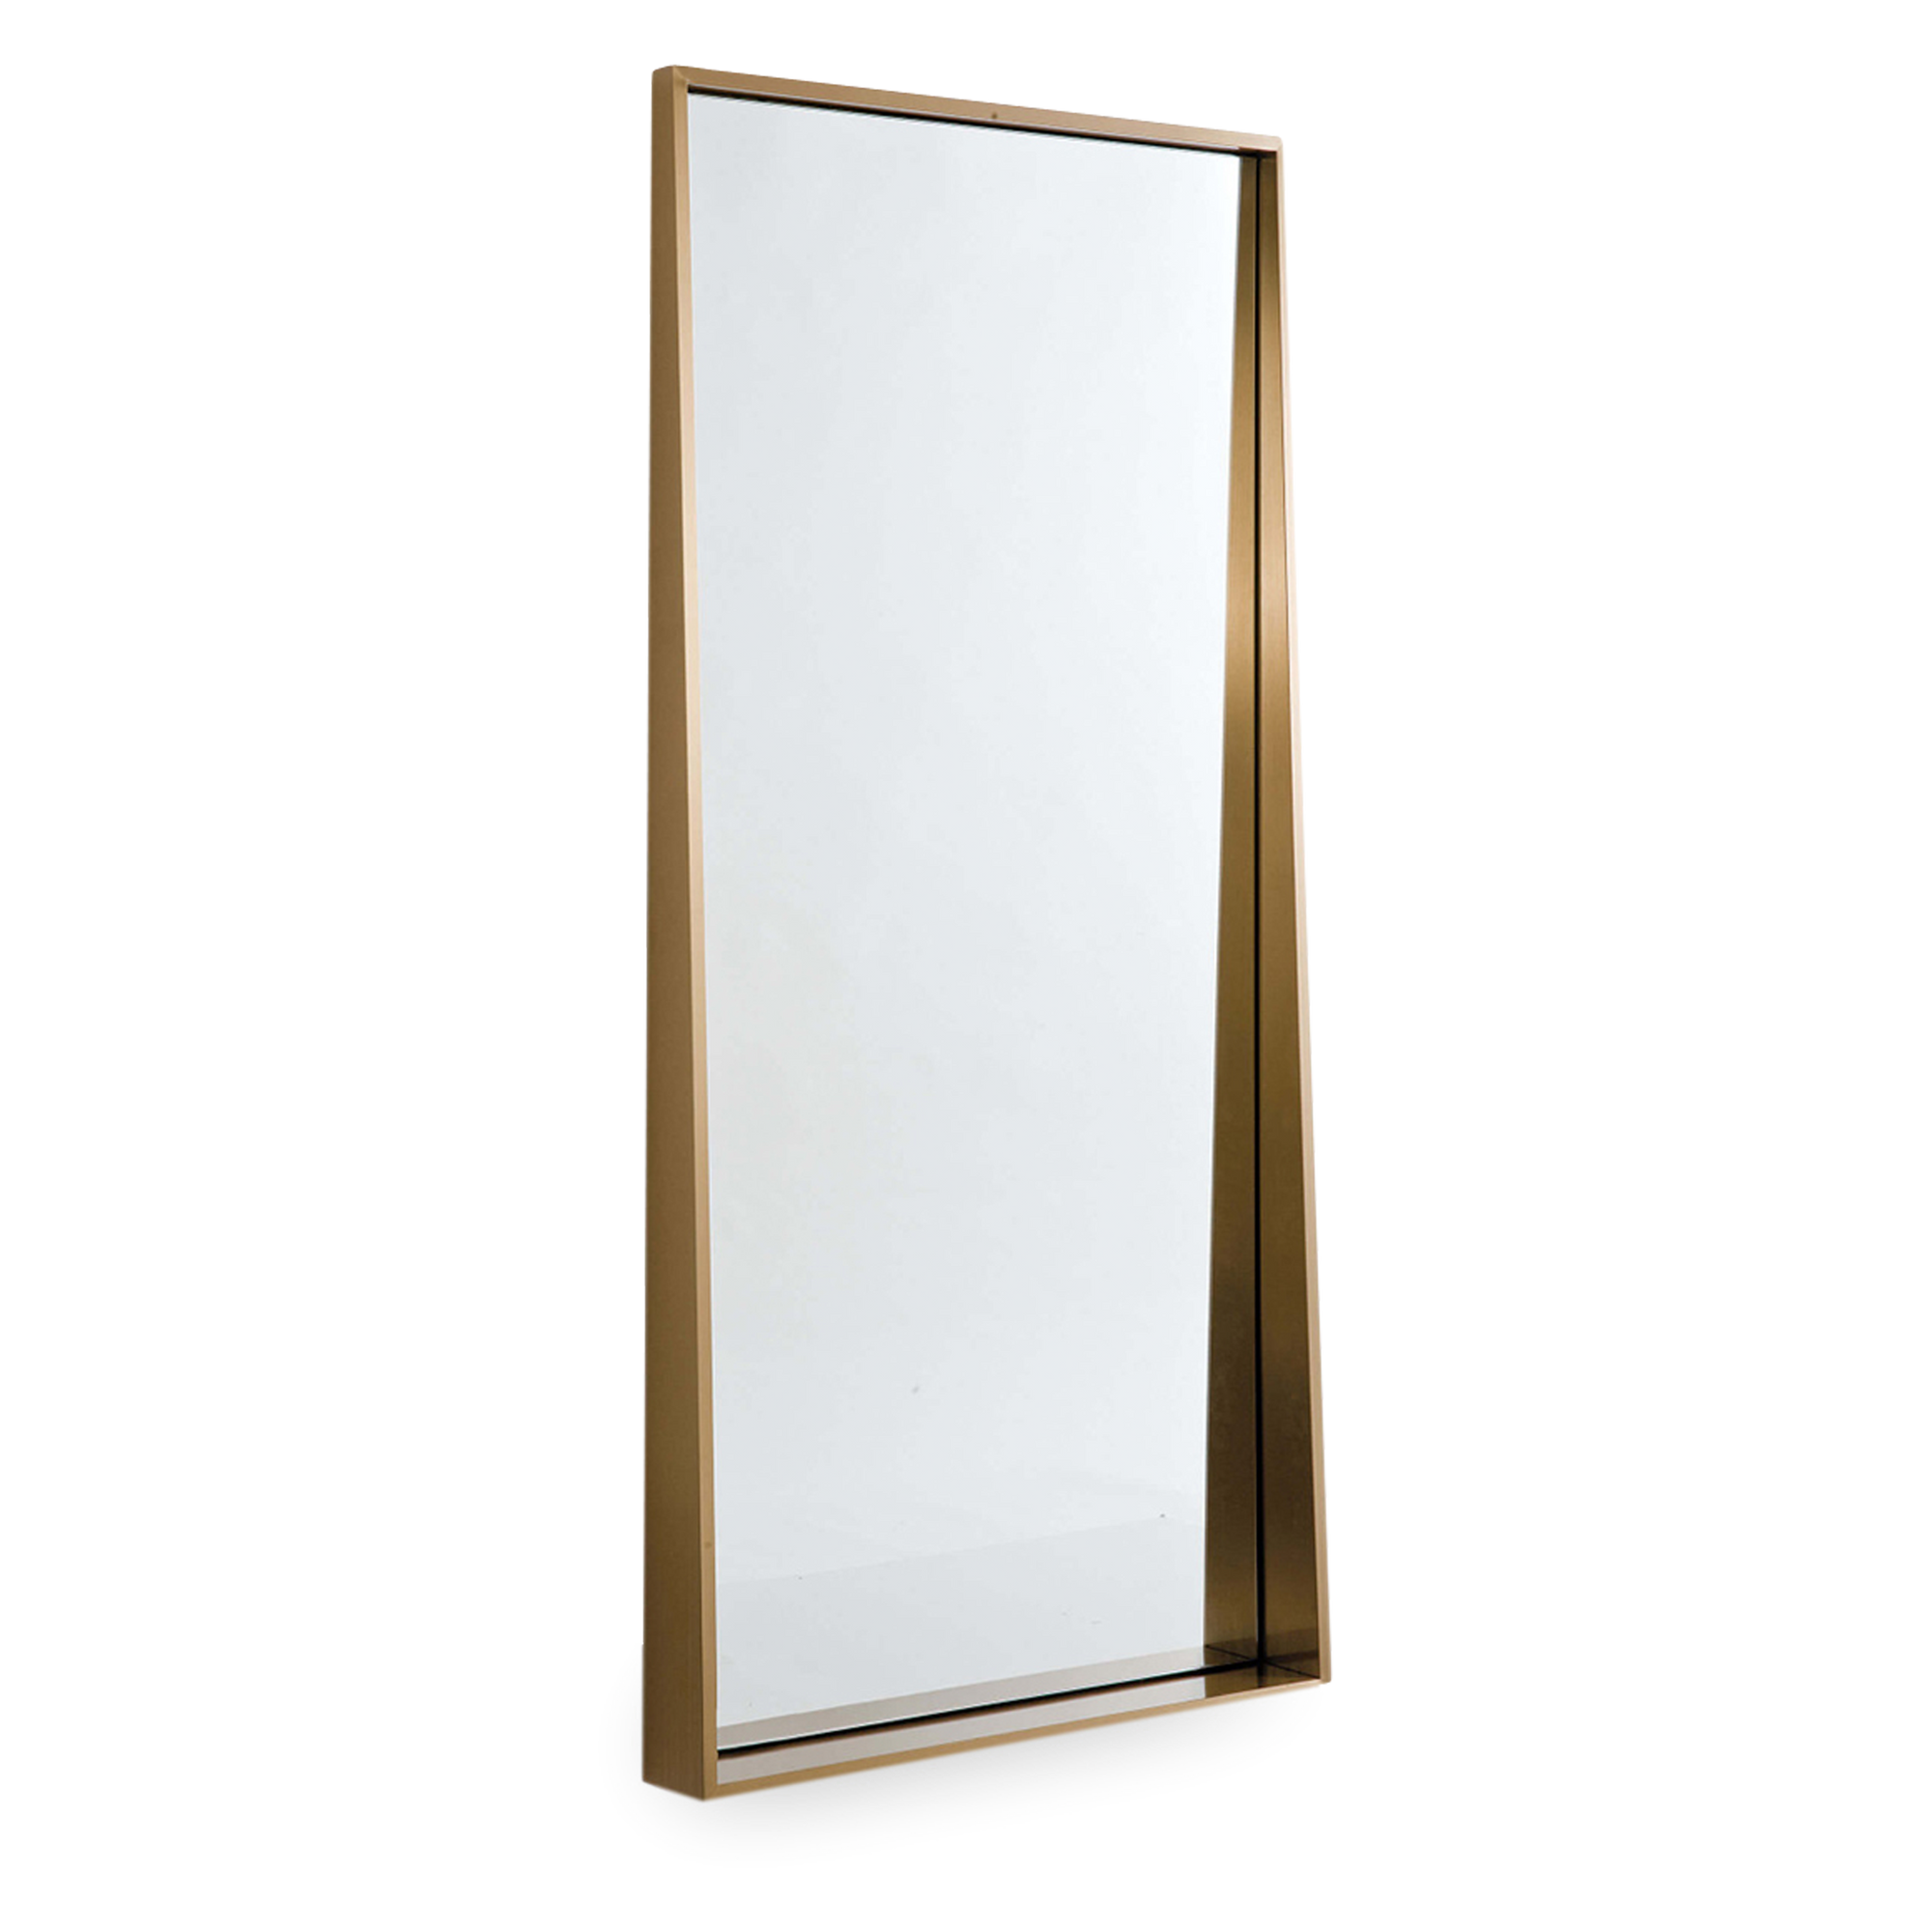 The Fader wall mirror features a sleek, contemporary design with a sloped shape in a sophisticated brass finish.